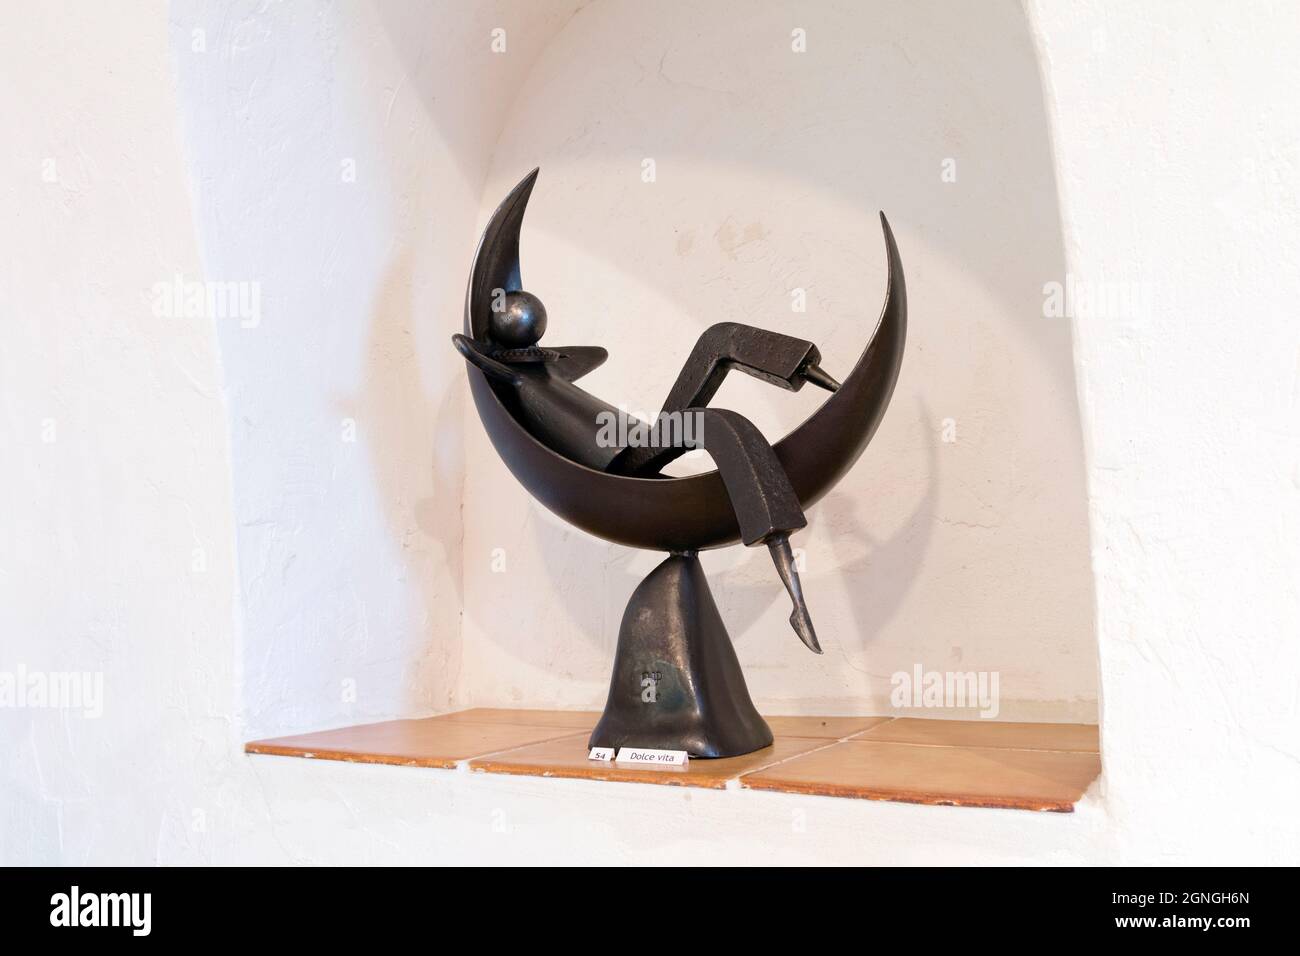 Dolce vita statue. Old tools and iron pieces are an inspiration to sculptor Jean-Pierre Augier, who gathers and turns them into characters on the move Stock Photo